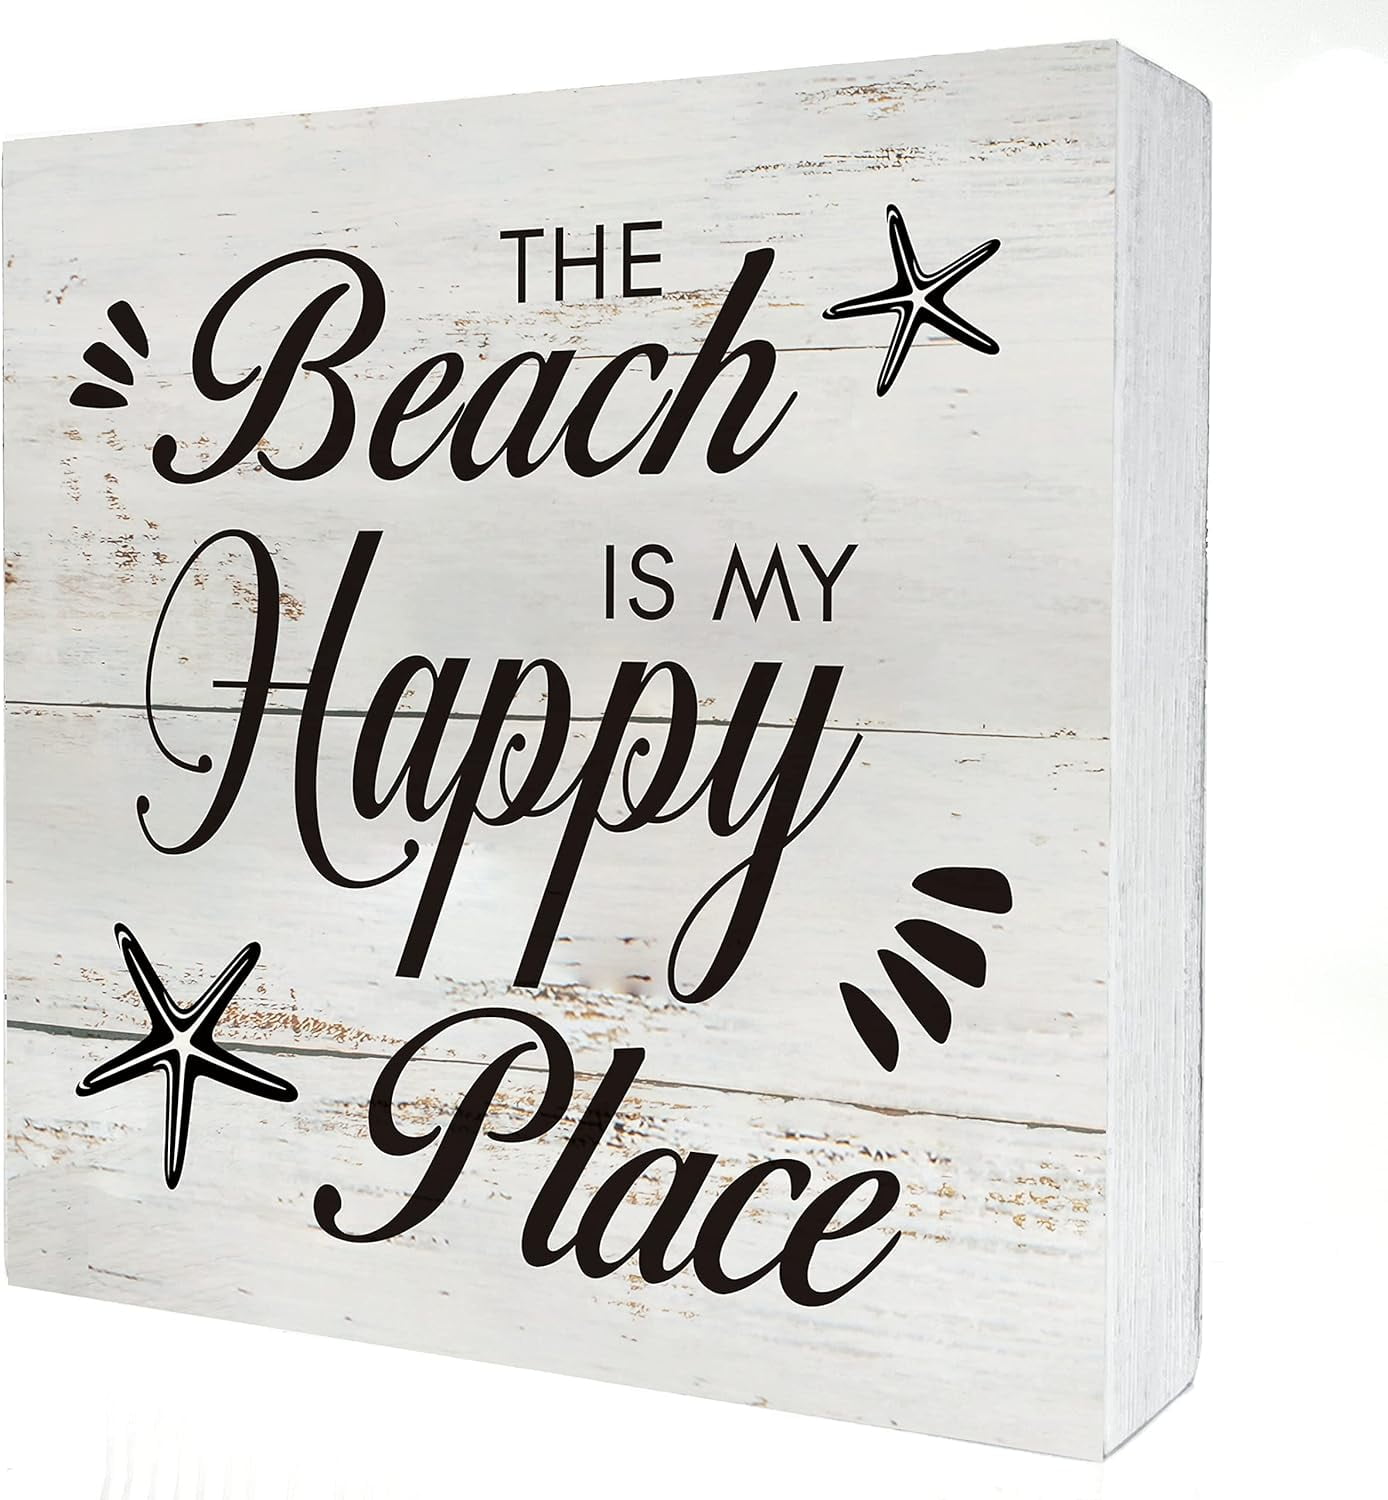 5x5 inch Beach House Wooden Box Sign Desk Decor Rustic the Beach is my ...